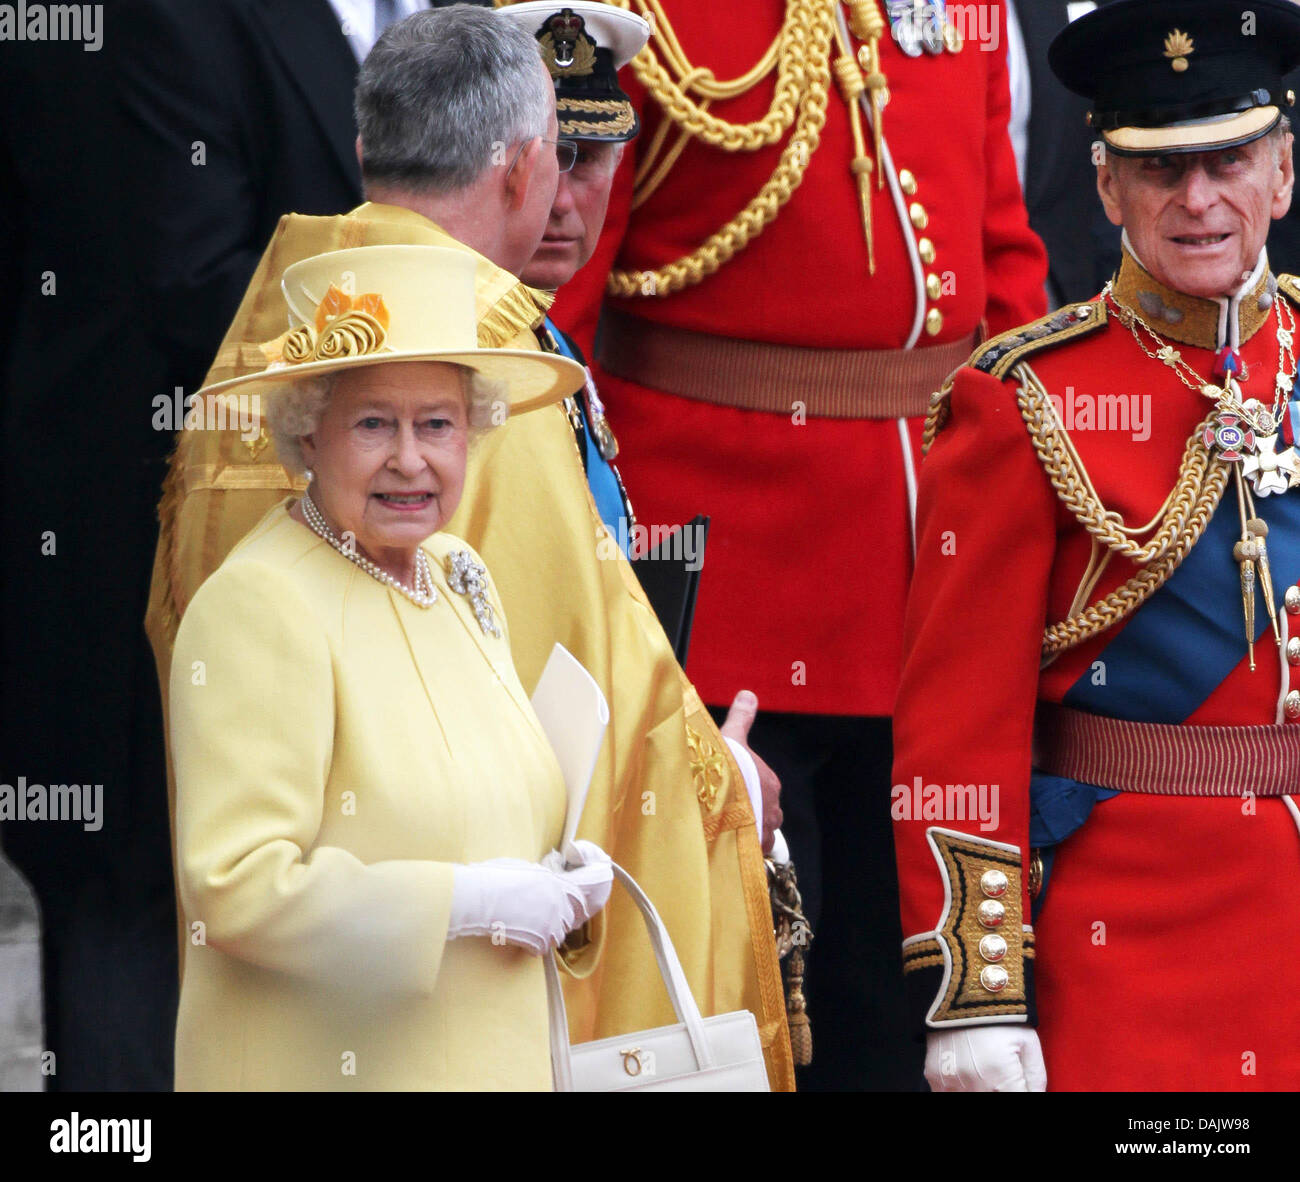 Queen Elizabeth II. and Prince Philip leave Westminster Abbey after the wedding ceremony of Prince William and Princess Catherine in London, Britain, 29 April 2011. Some 1,900 guests followed the royal marriage ceremony of Prince William and Kate Middleton in the church. Photo: Albert Nieboer NETHERLANDS OUT Stock Photo